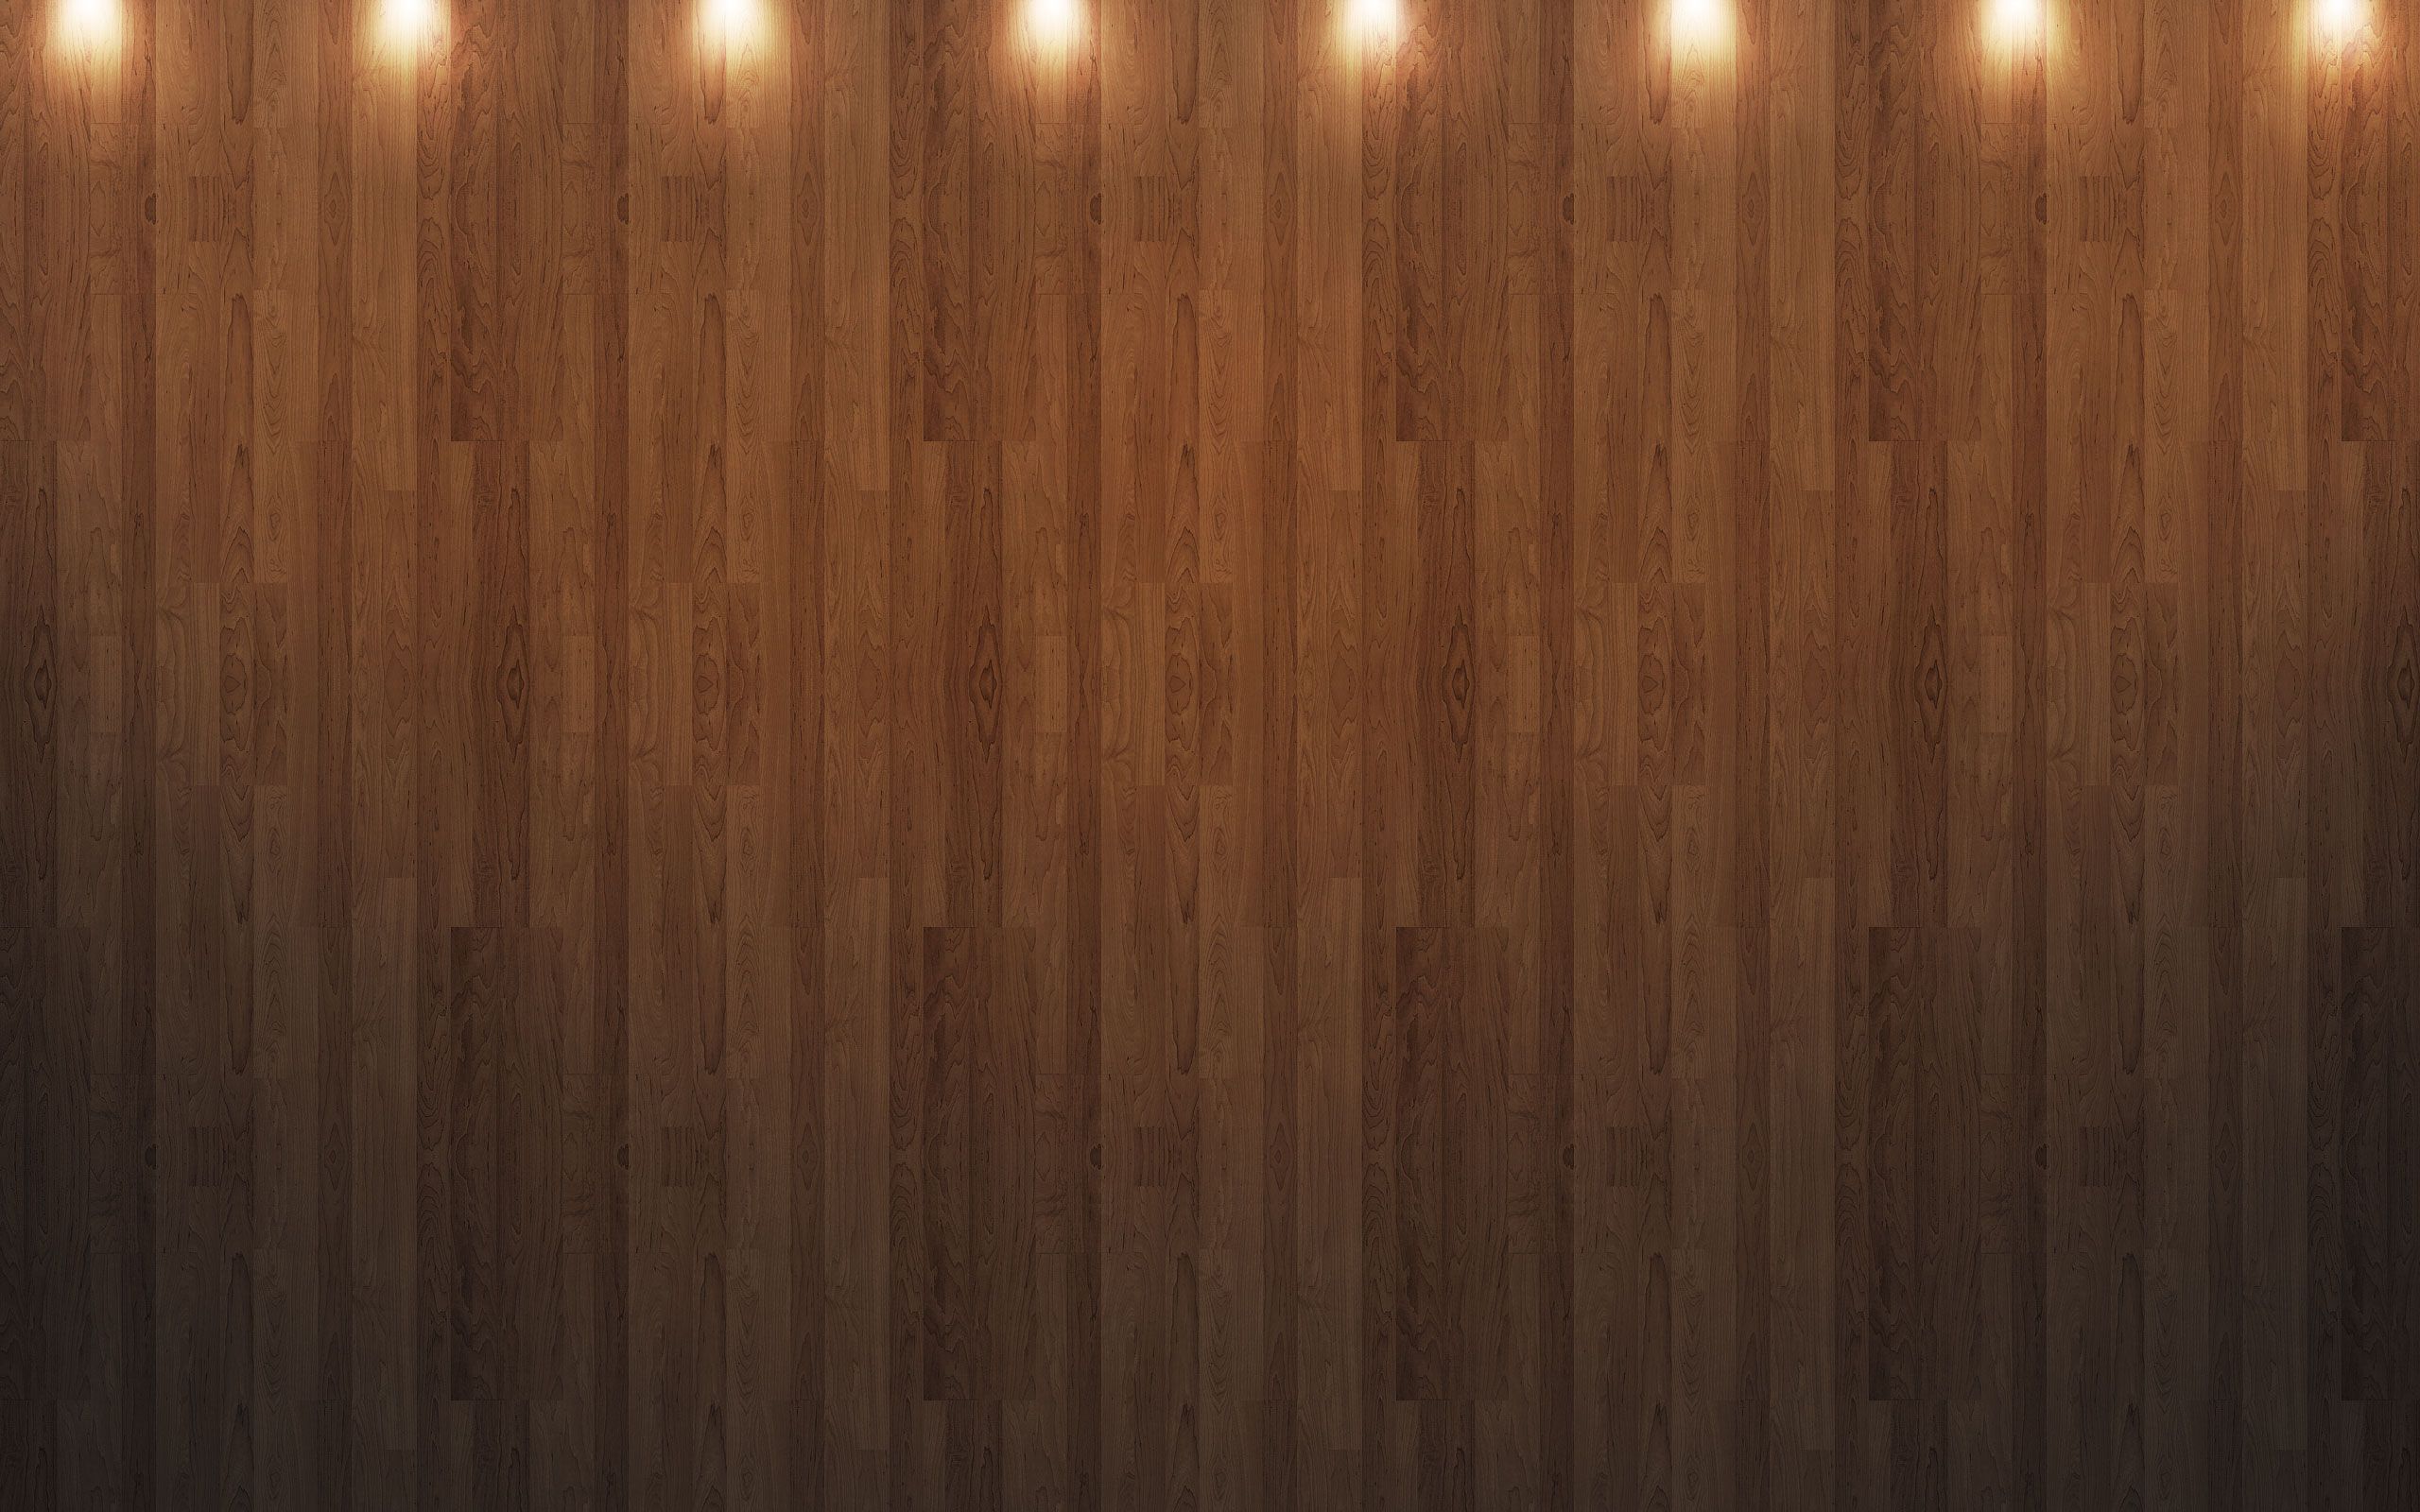 Full HD Wallpapers Backgrounds, Wood, Spotlights, Brown, by